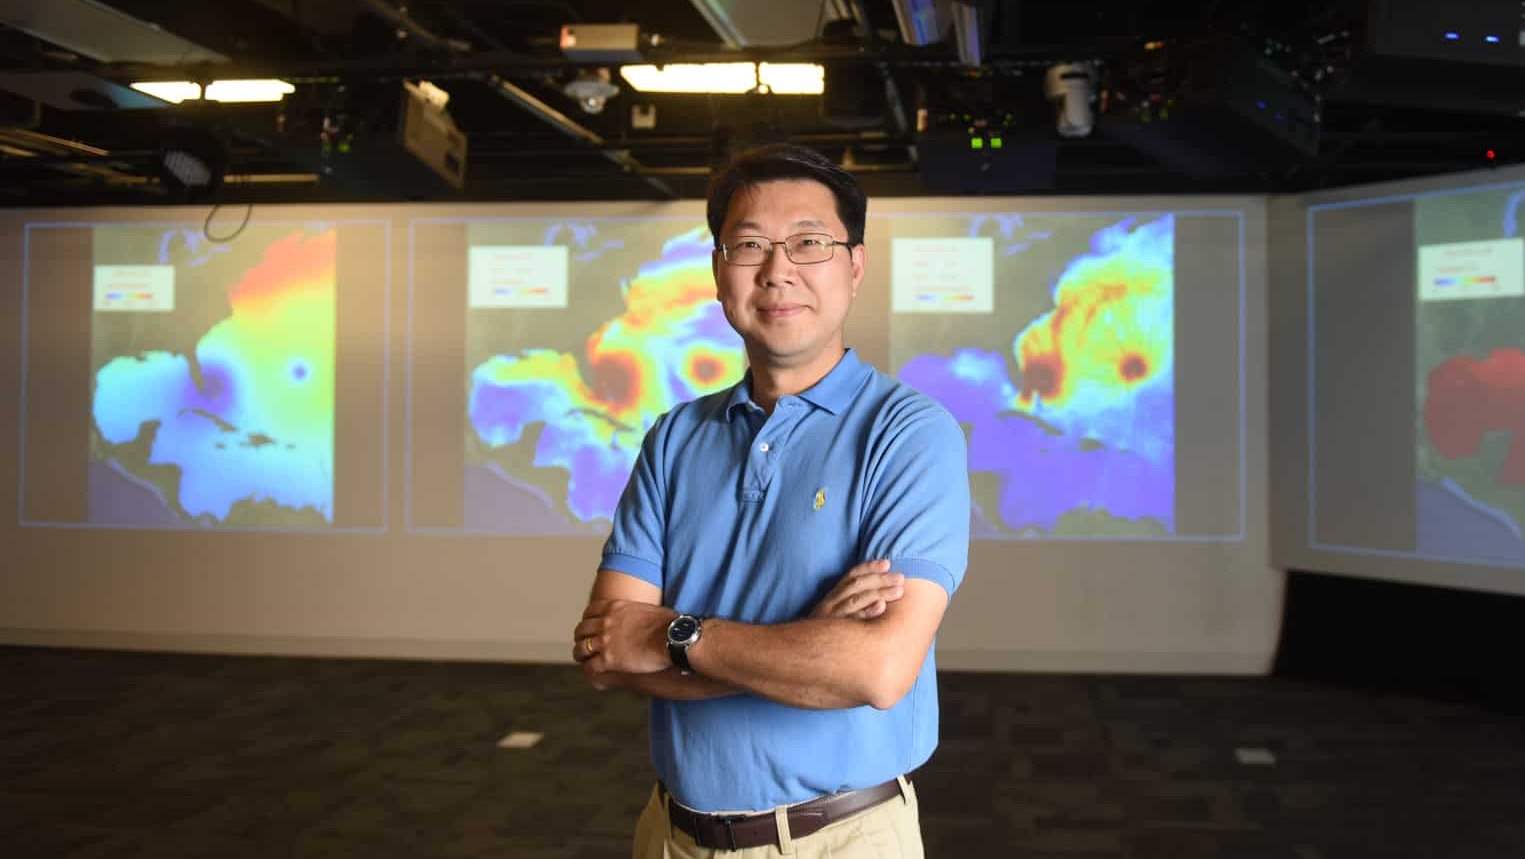 Researcher standing in front of map technology